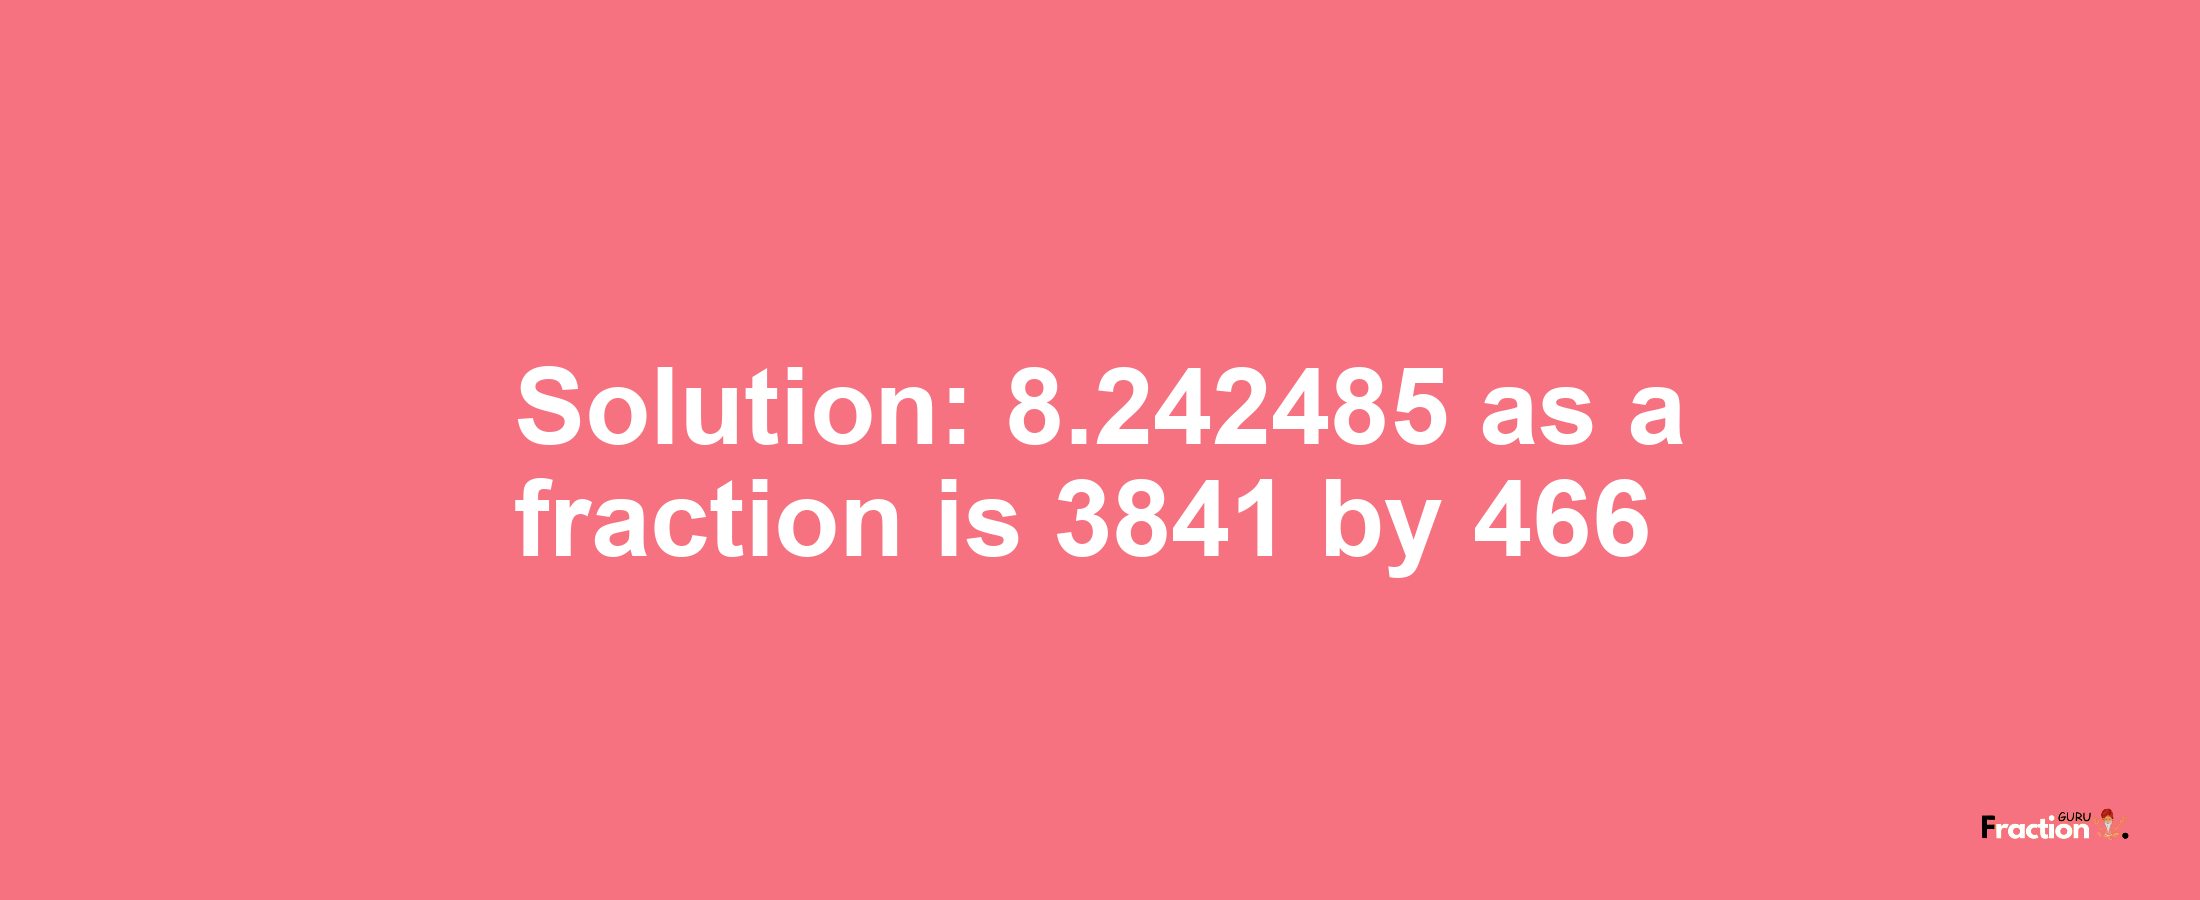 Solution:8.242485 as a fraction is 3841/466